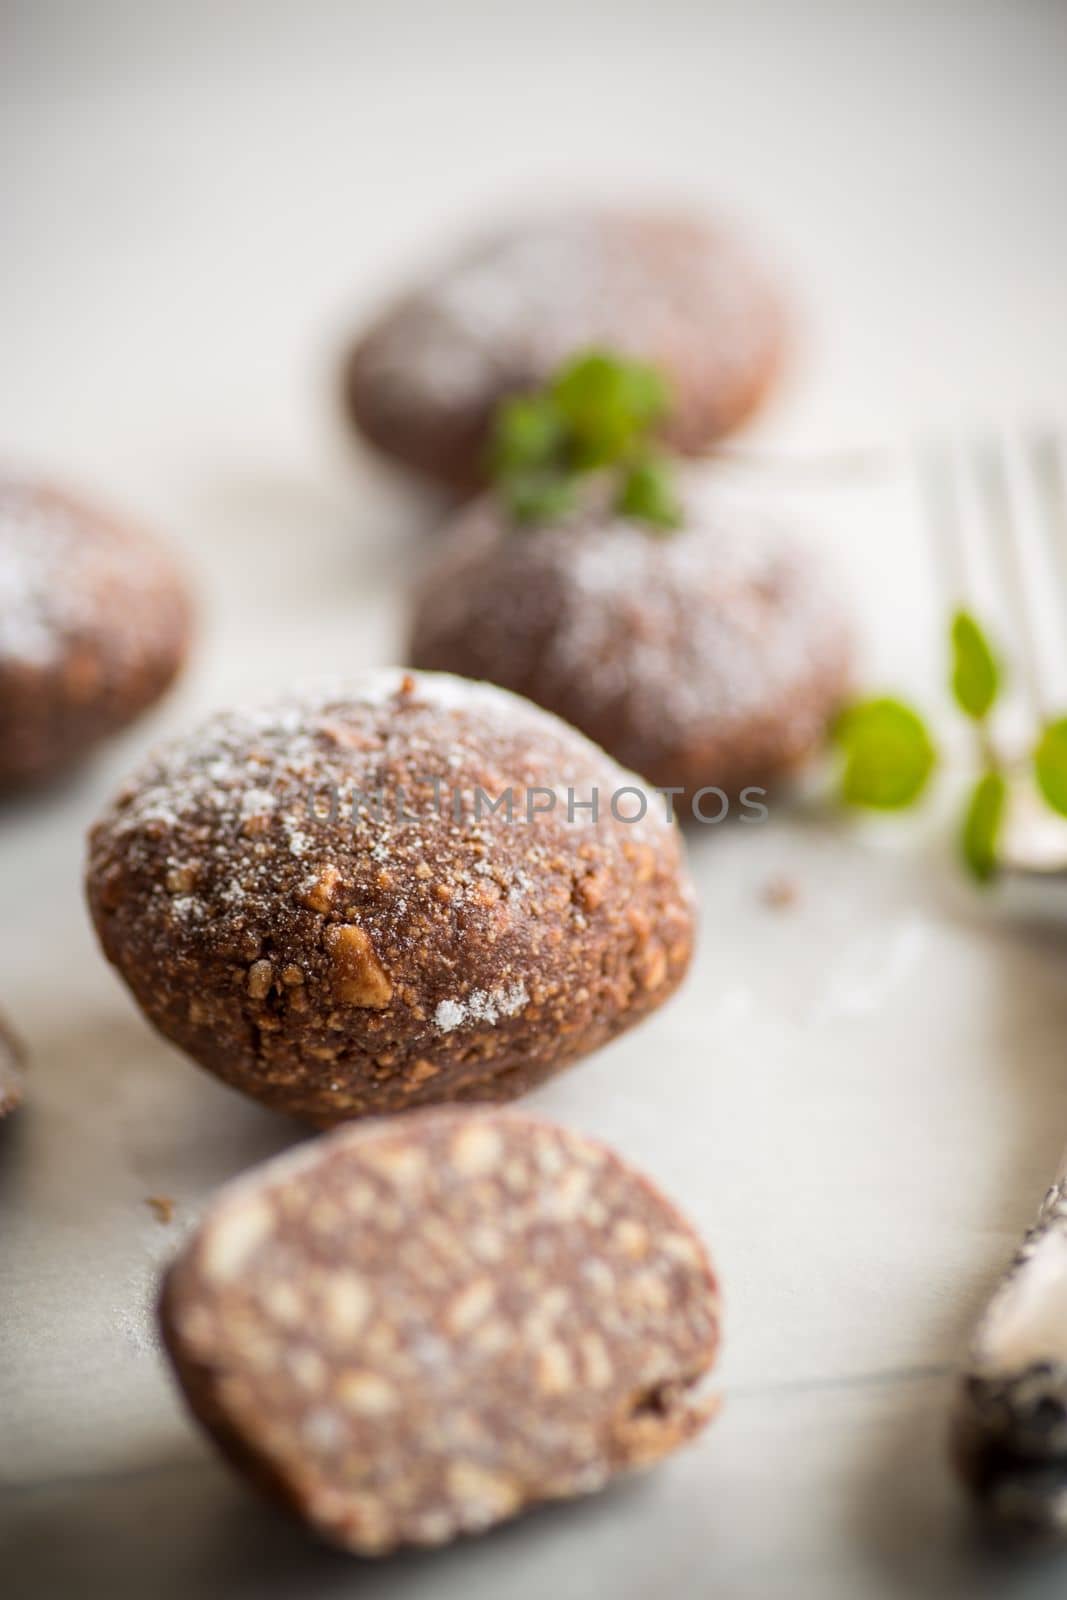 chocolate sweet cakes from mashed biscuits with additives by Rawlik